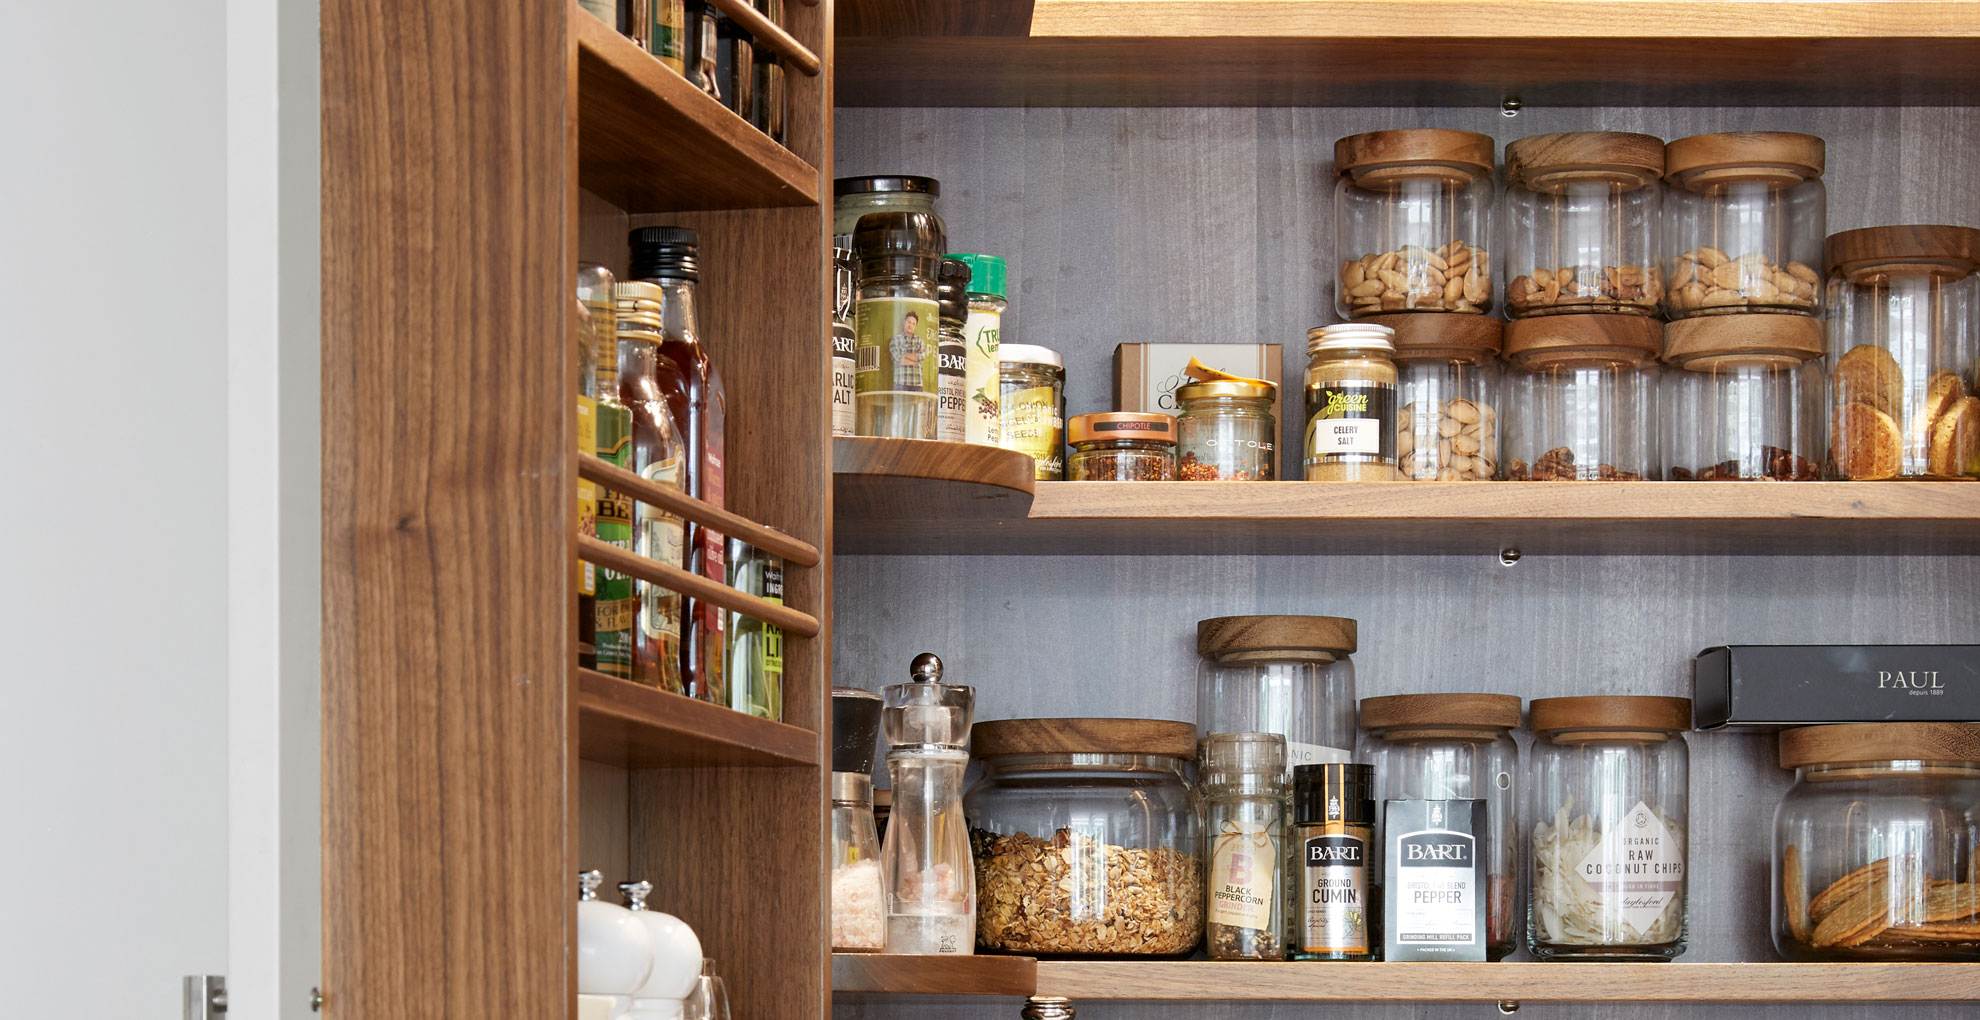 Inside an organised kitchen cabinets showing food stored in glass containers